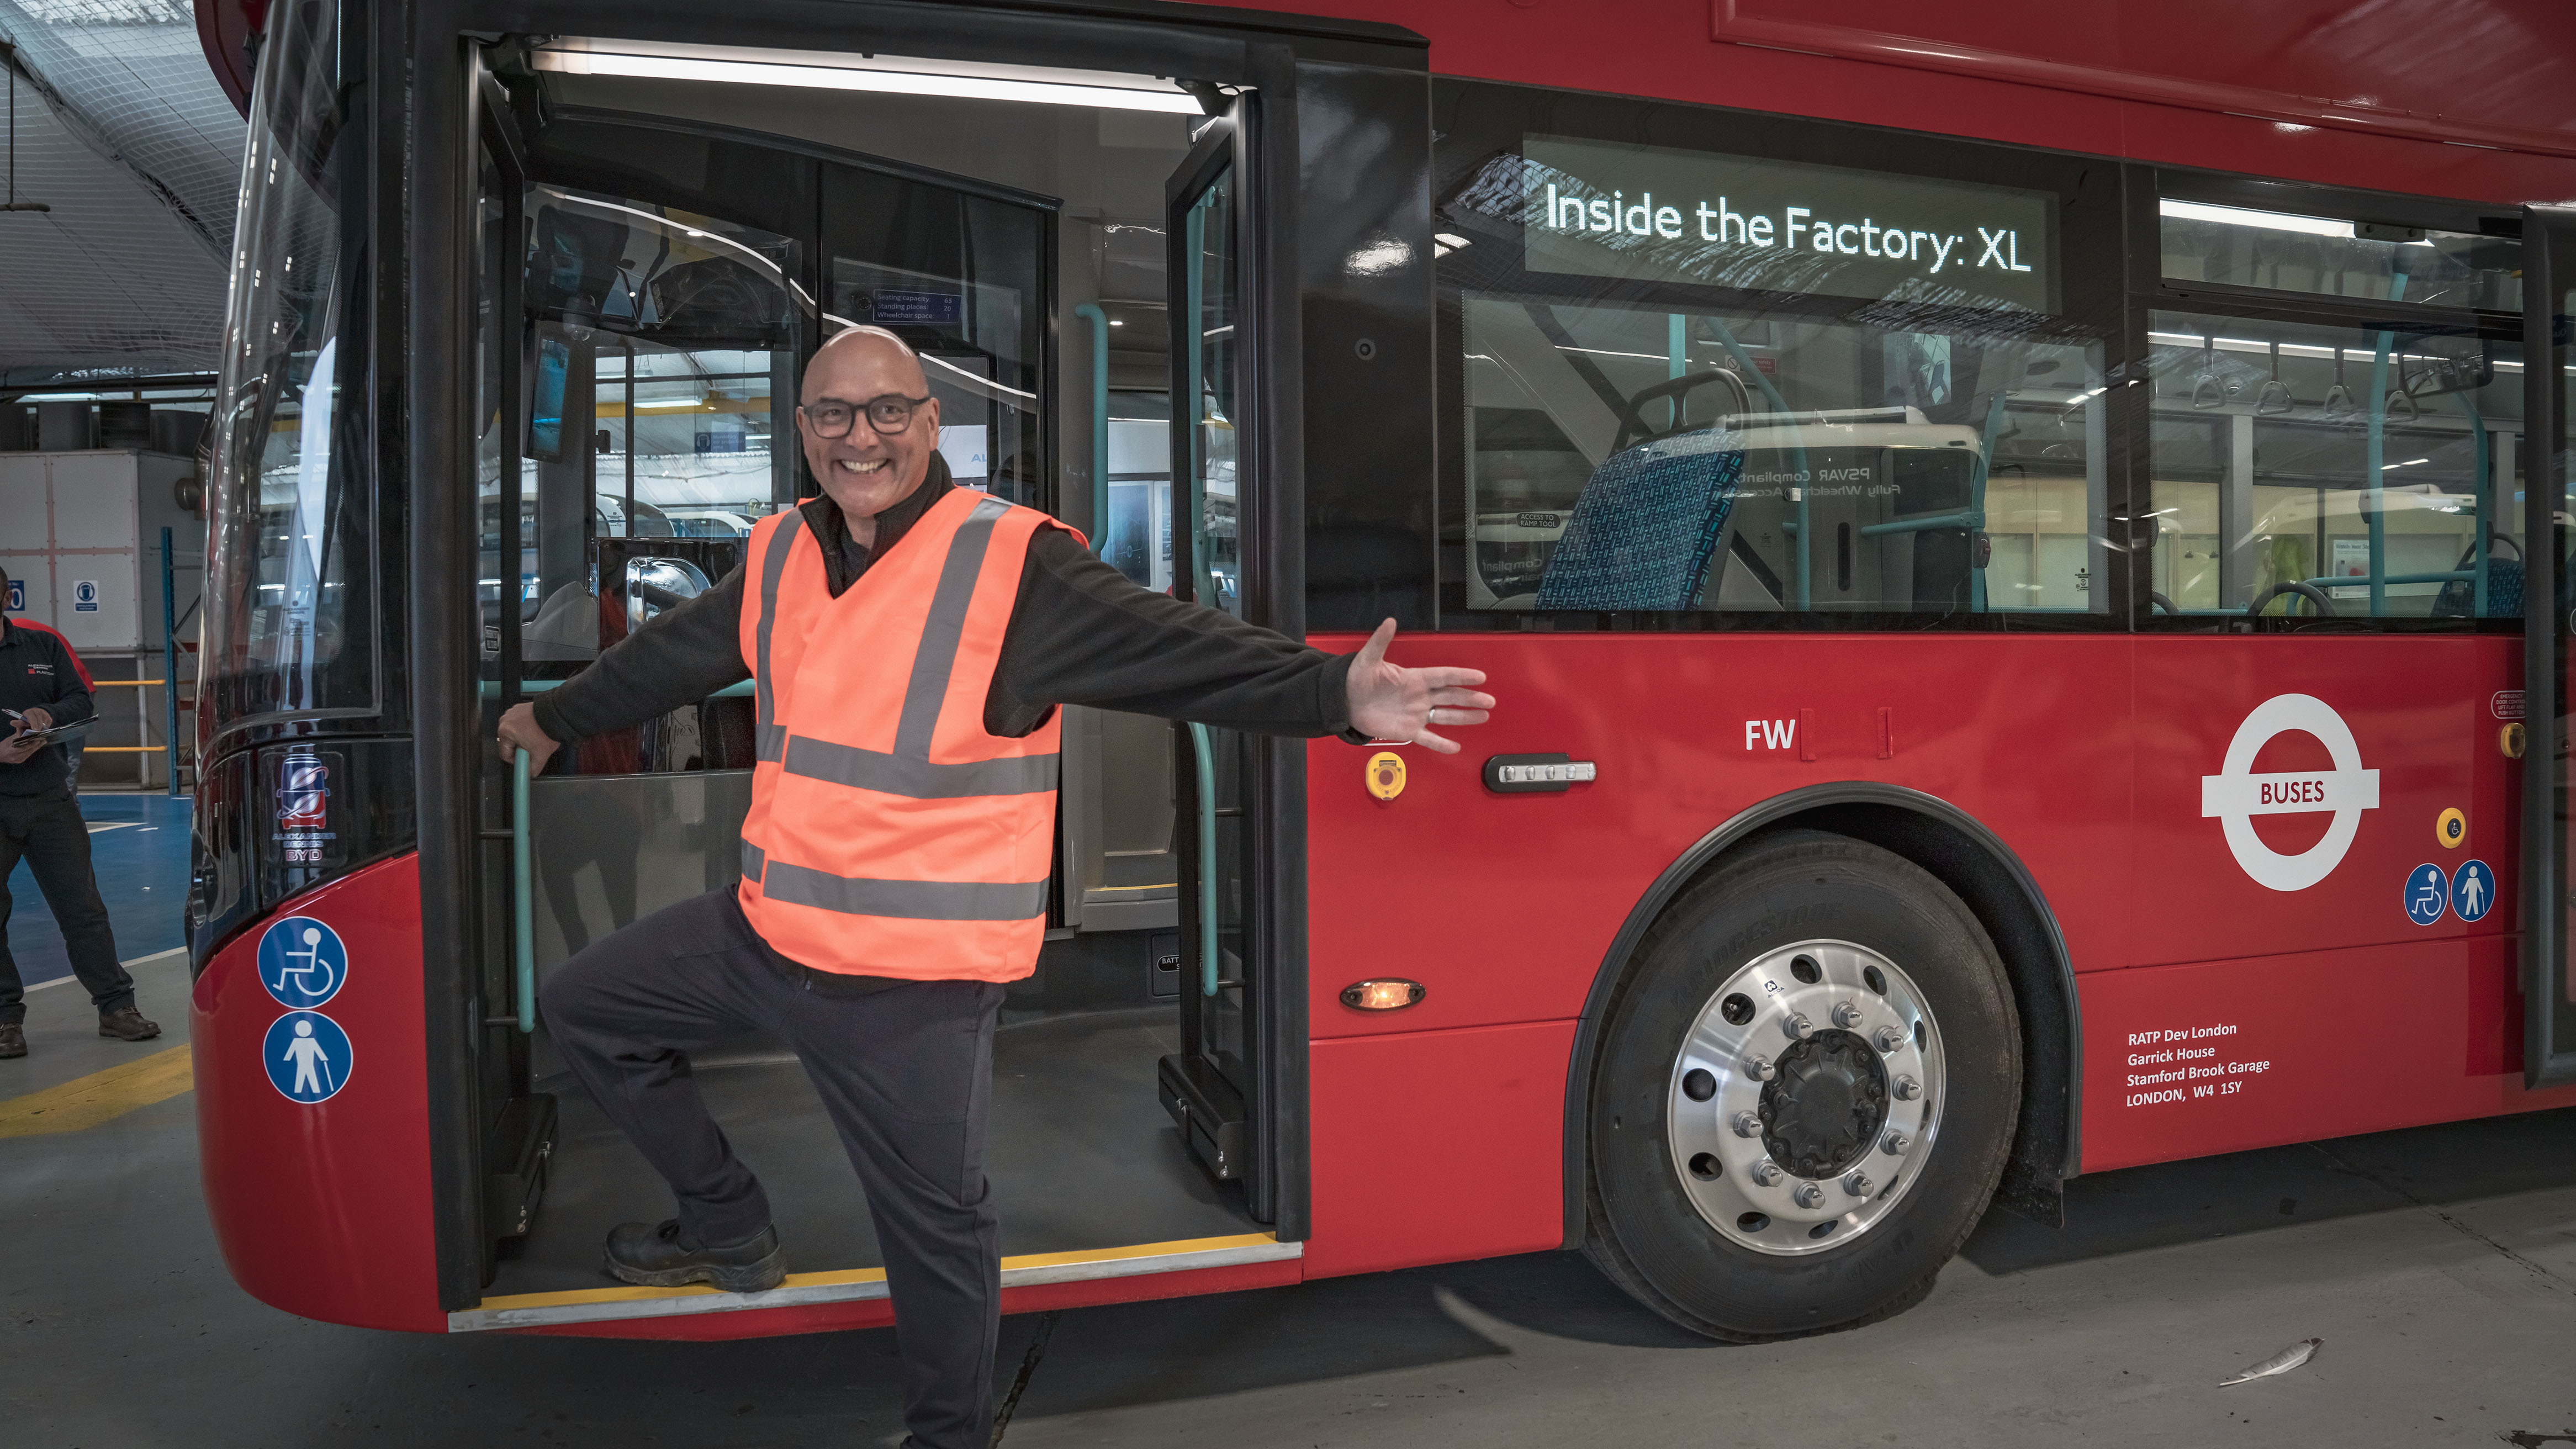 TV Tonight Gregg Wallace poses as he boards a London double-decker bus